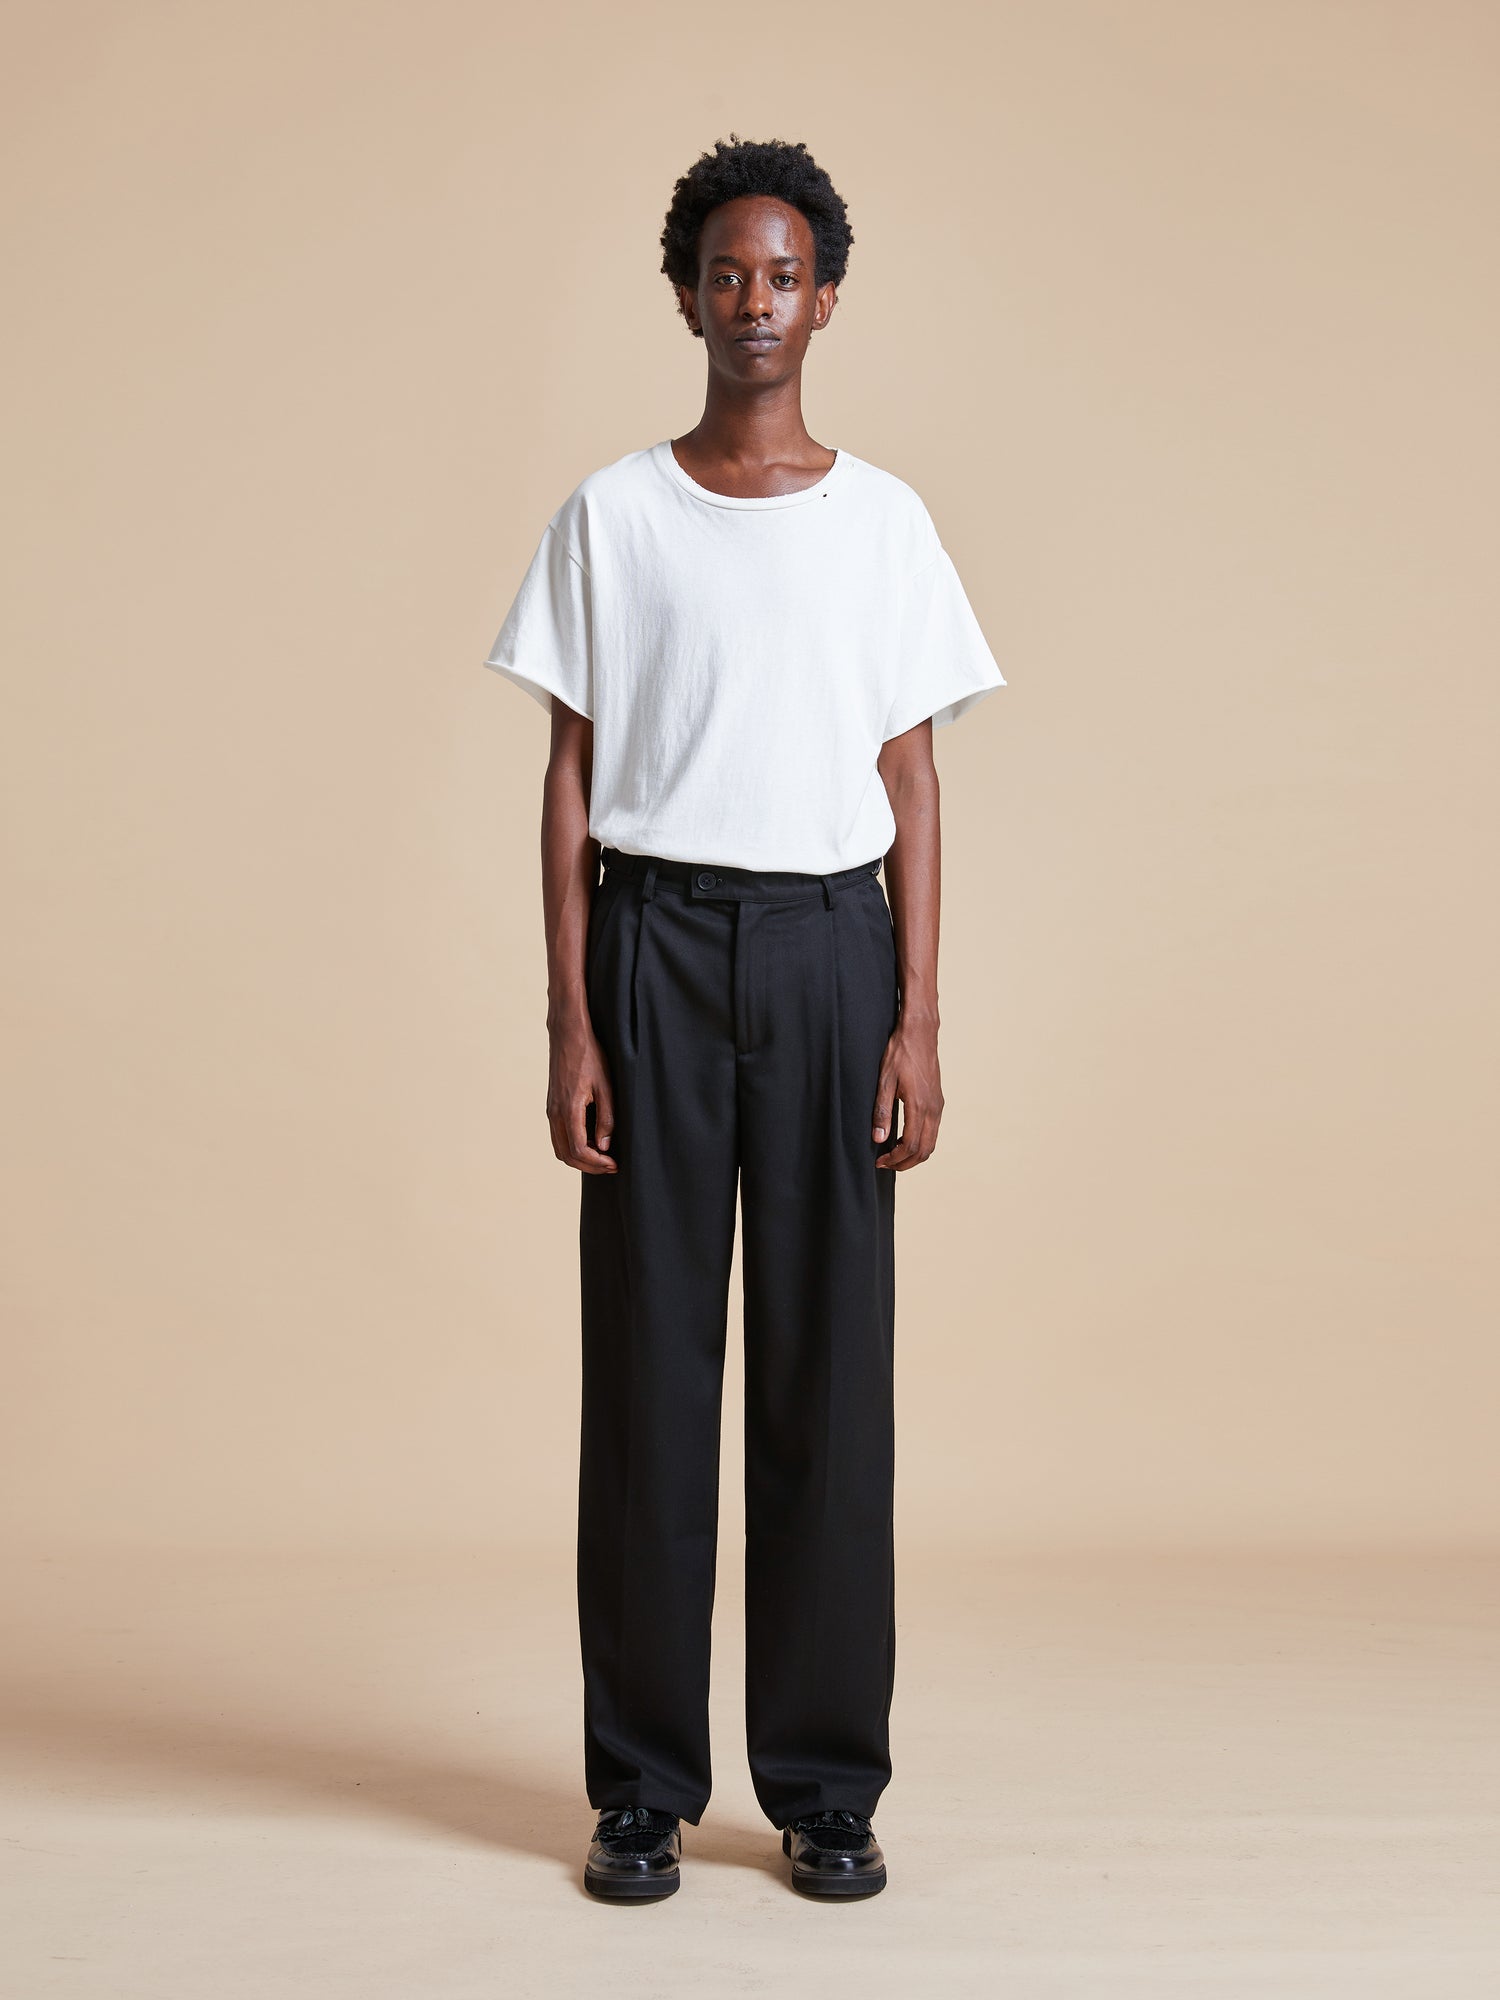 The model is wearing a white t-shirt and Found Pleated Trousers.